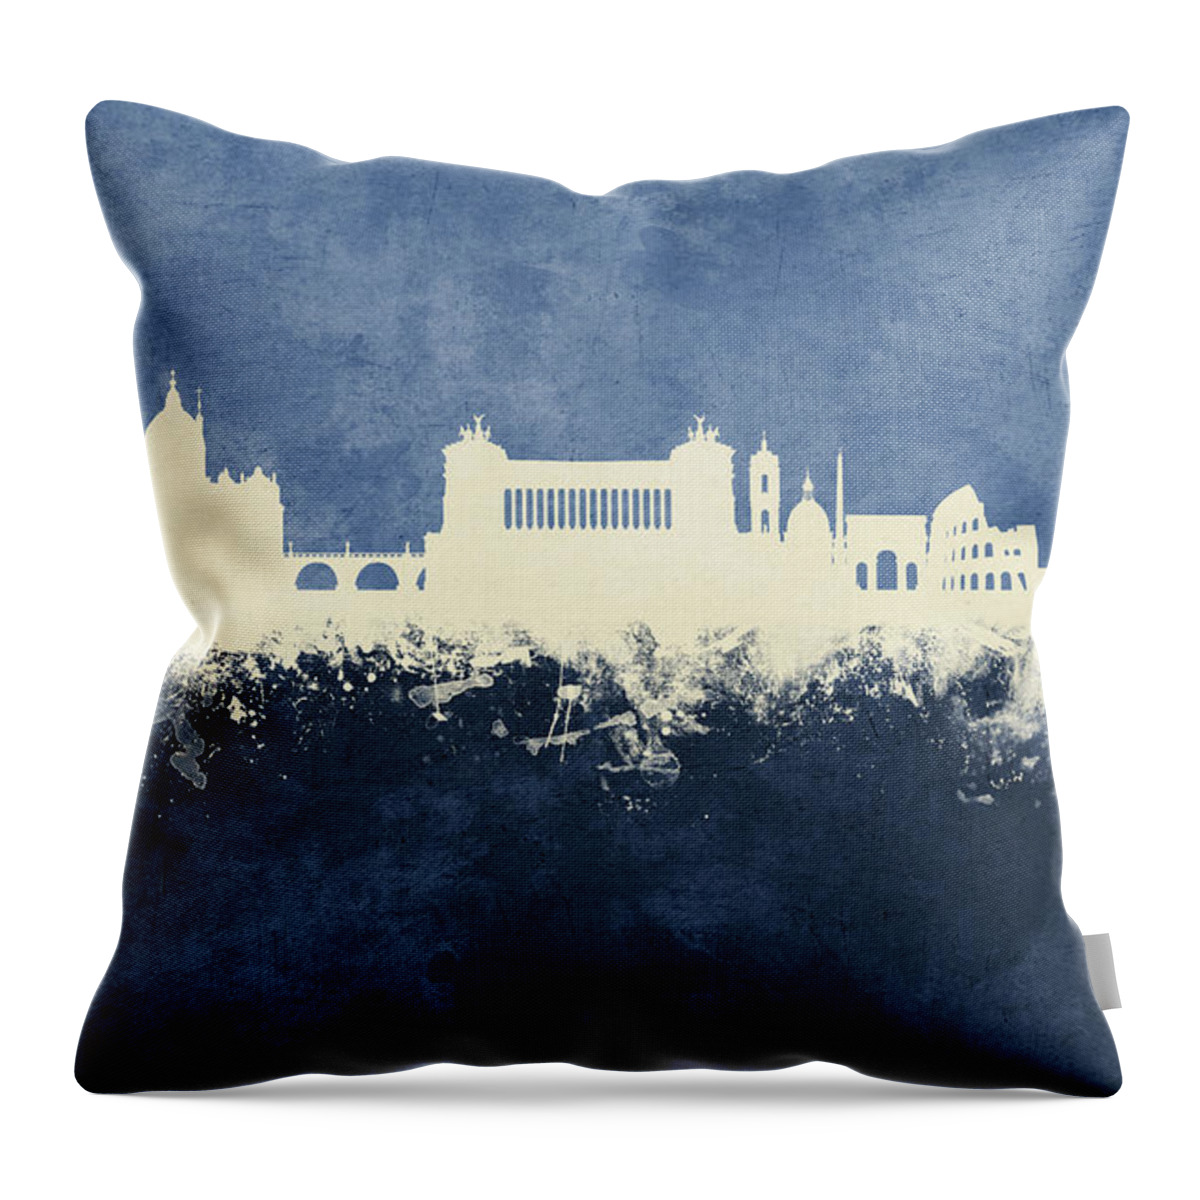 Rome Throw Pillow featuring the digital art Rome Italy Skyline #13 by Michael Tompsett